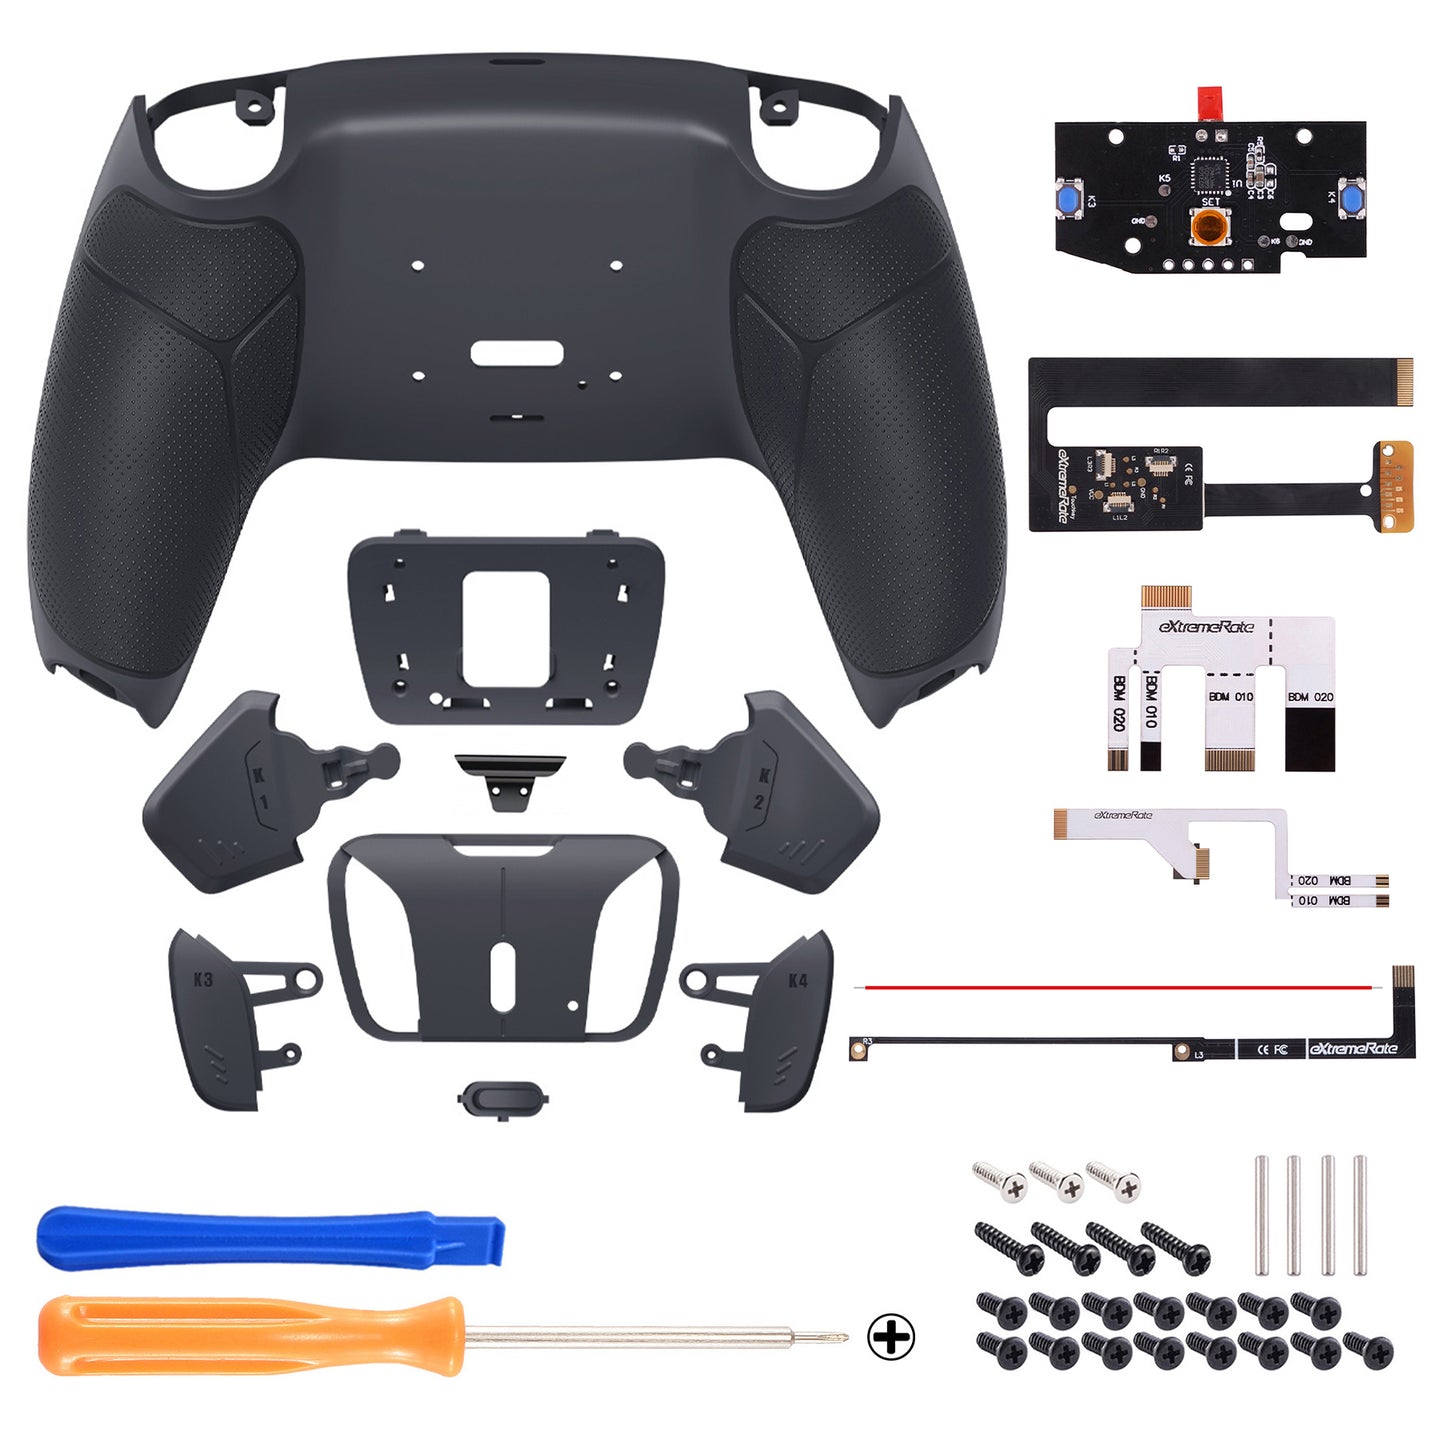 eXtremeRate Remappable RISE 4.0 Remap Kit for PS5 Controller BDM-010/020 - Rubberized Dark Gray eXtremeRate